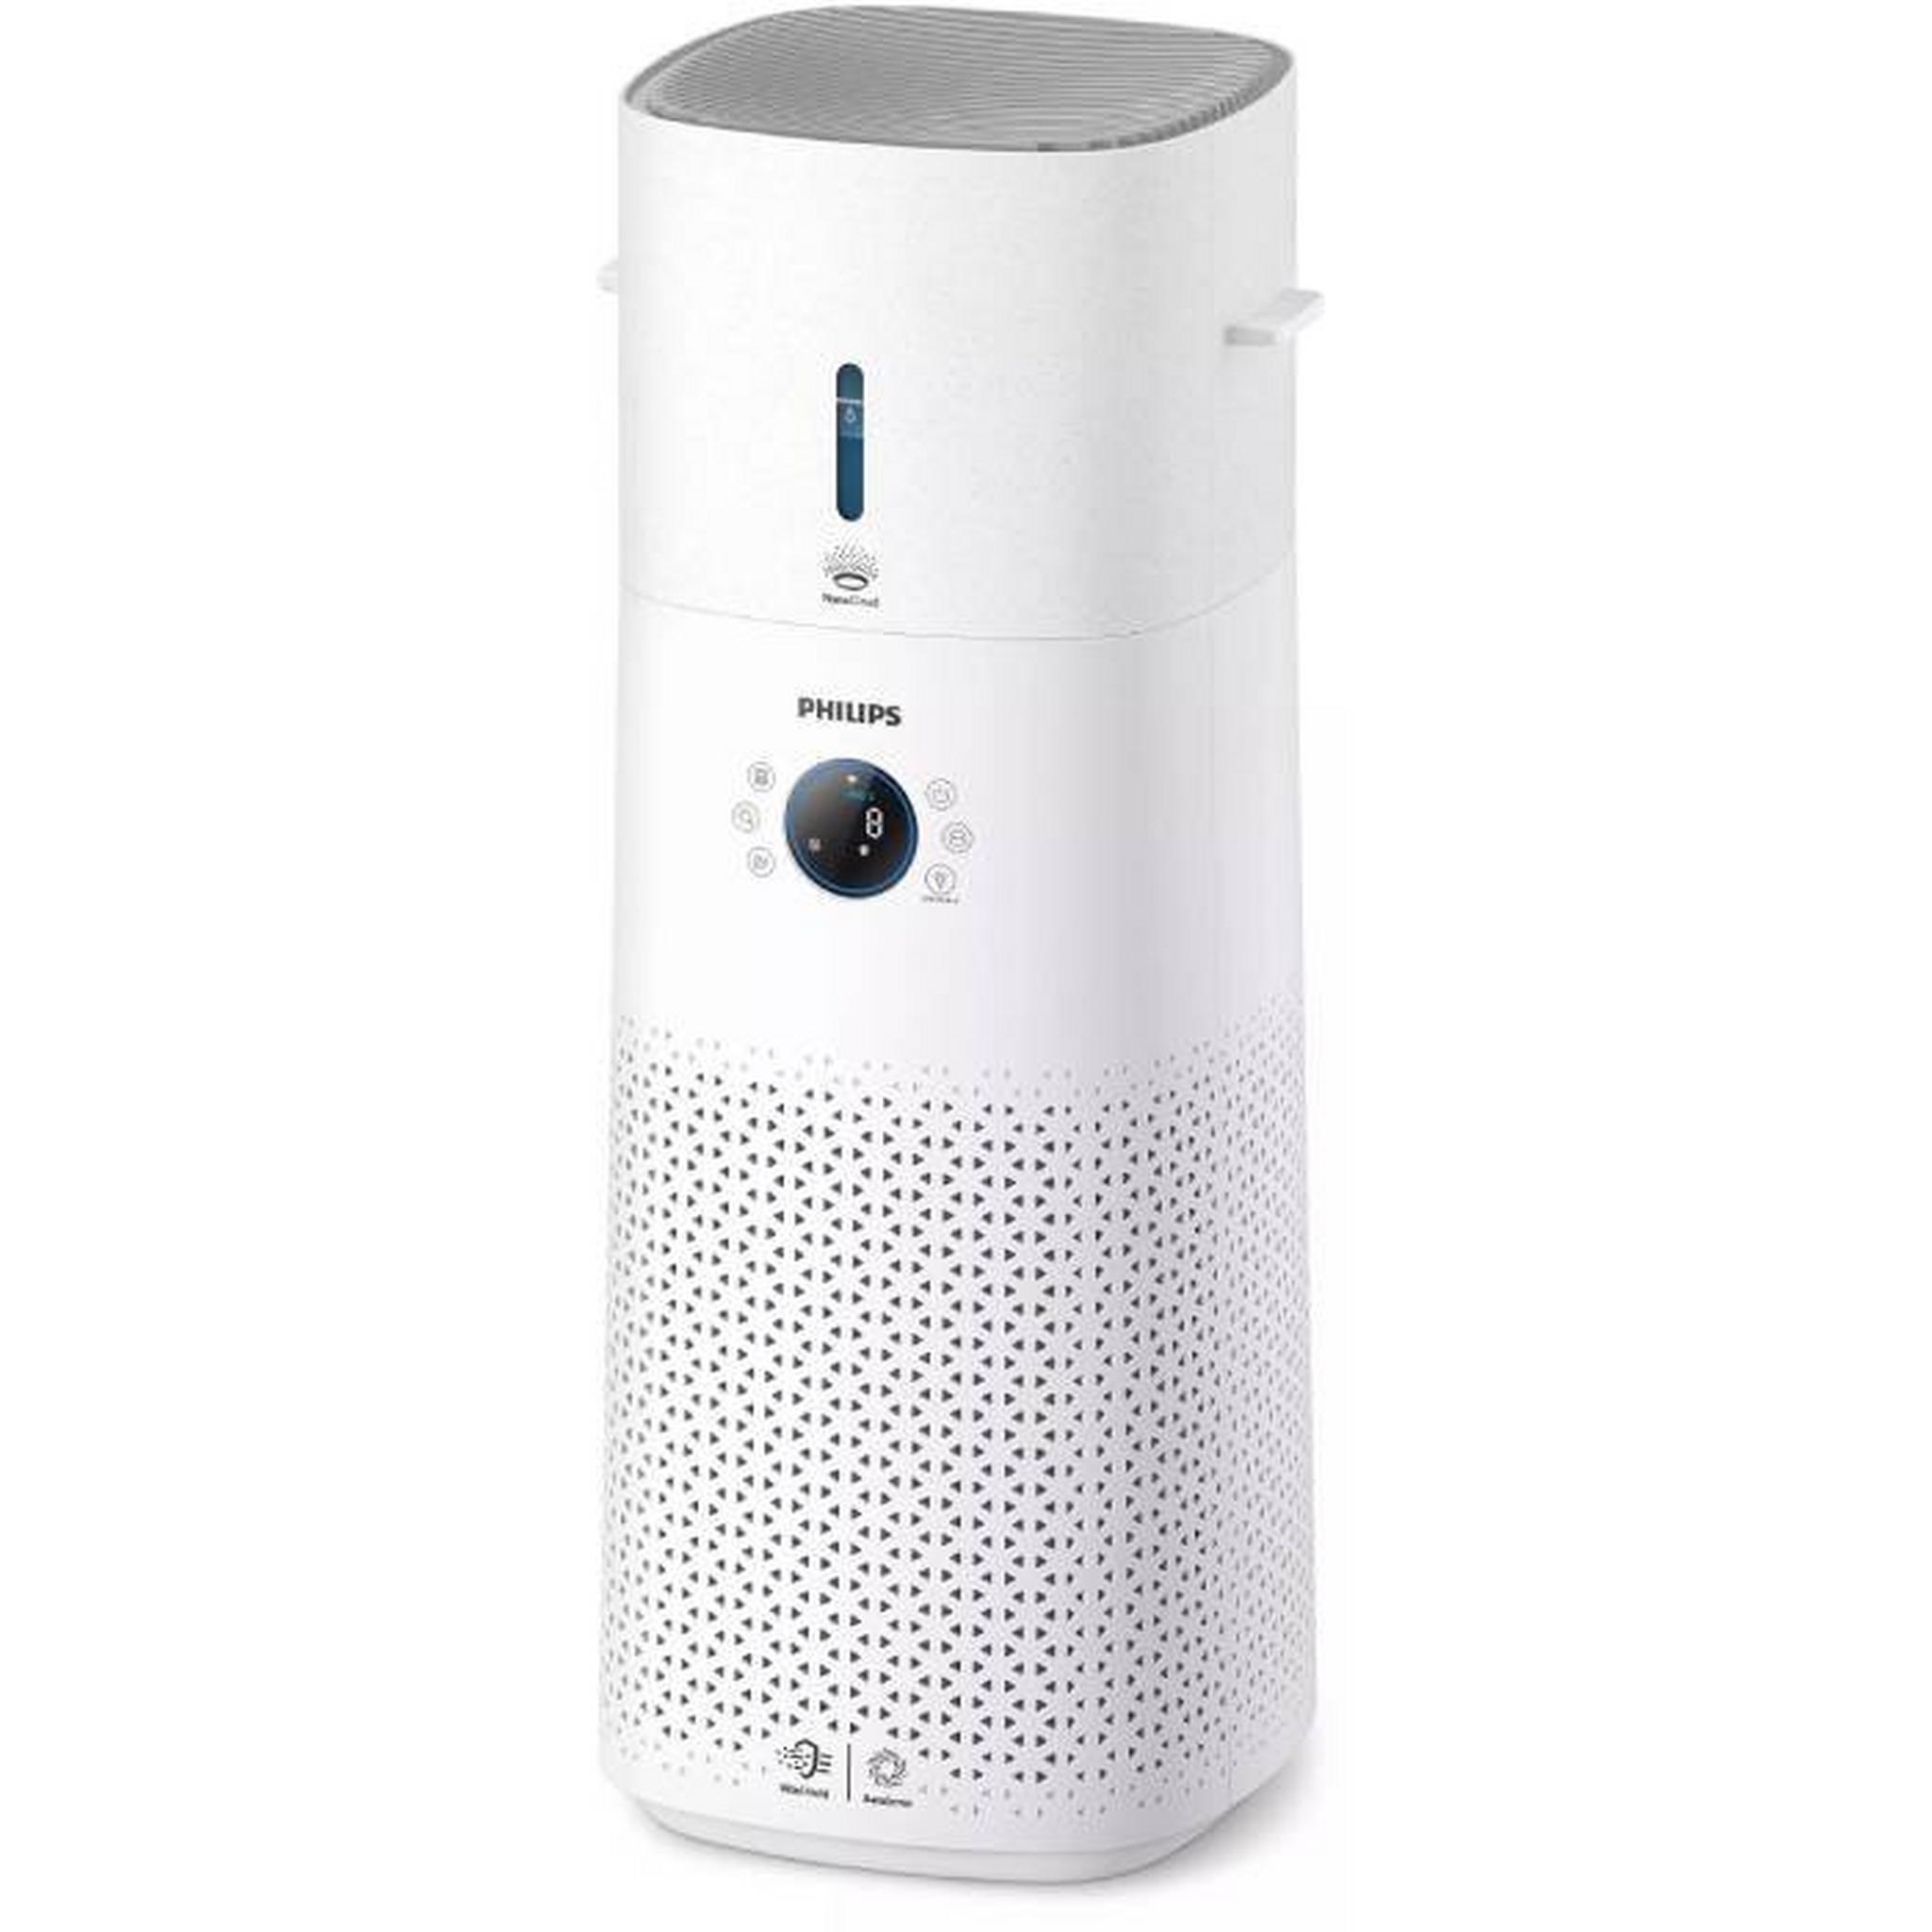 Philips Series 3000 2-in-1 Air Purifier & Humidifier, AC3737/10 – White